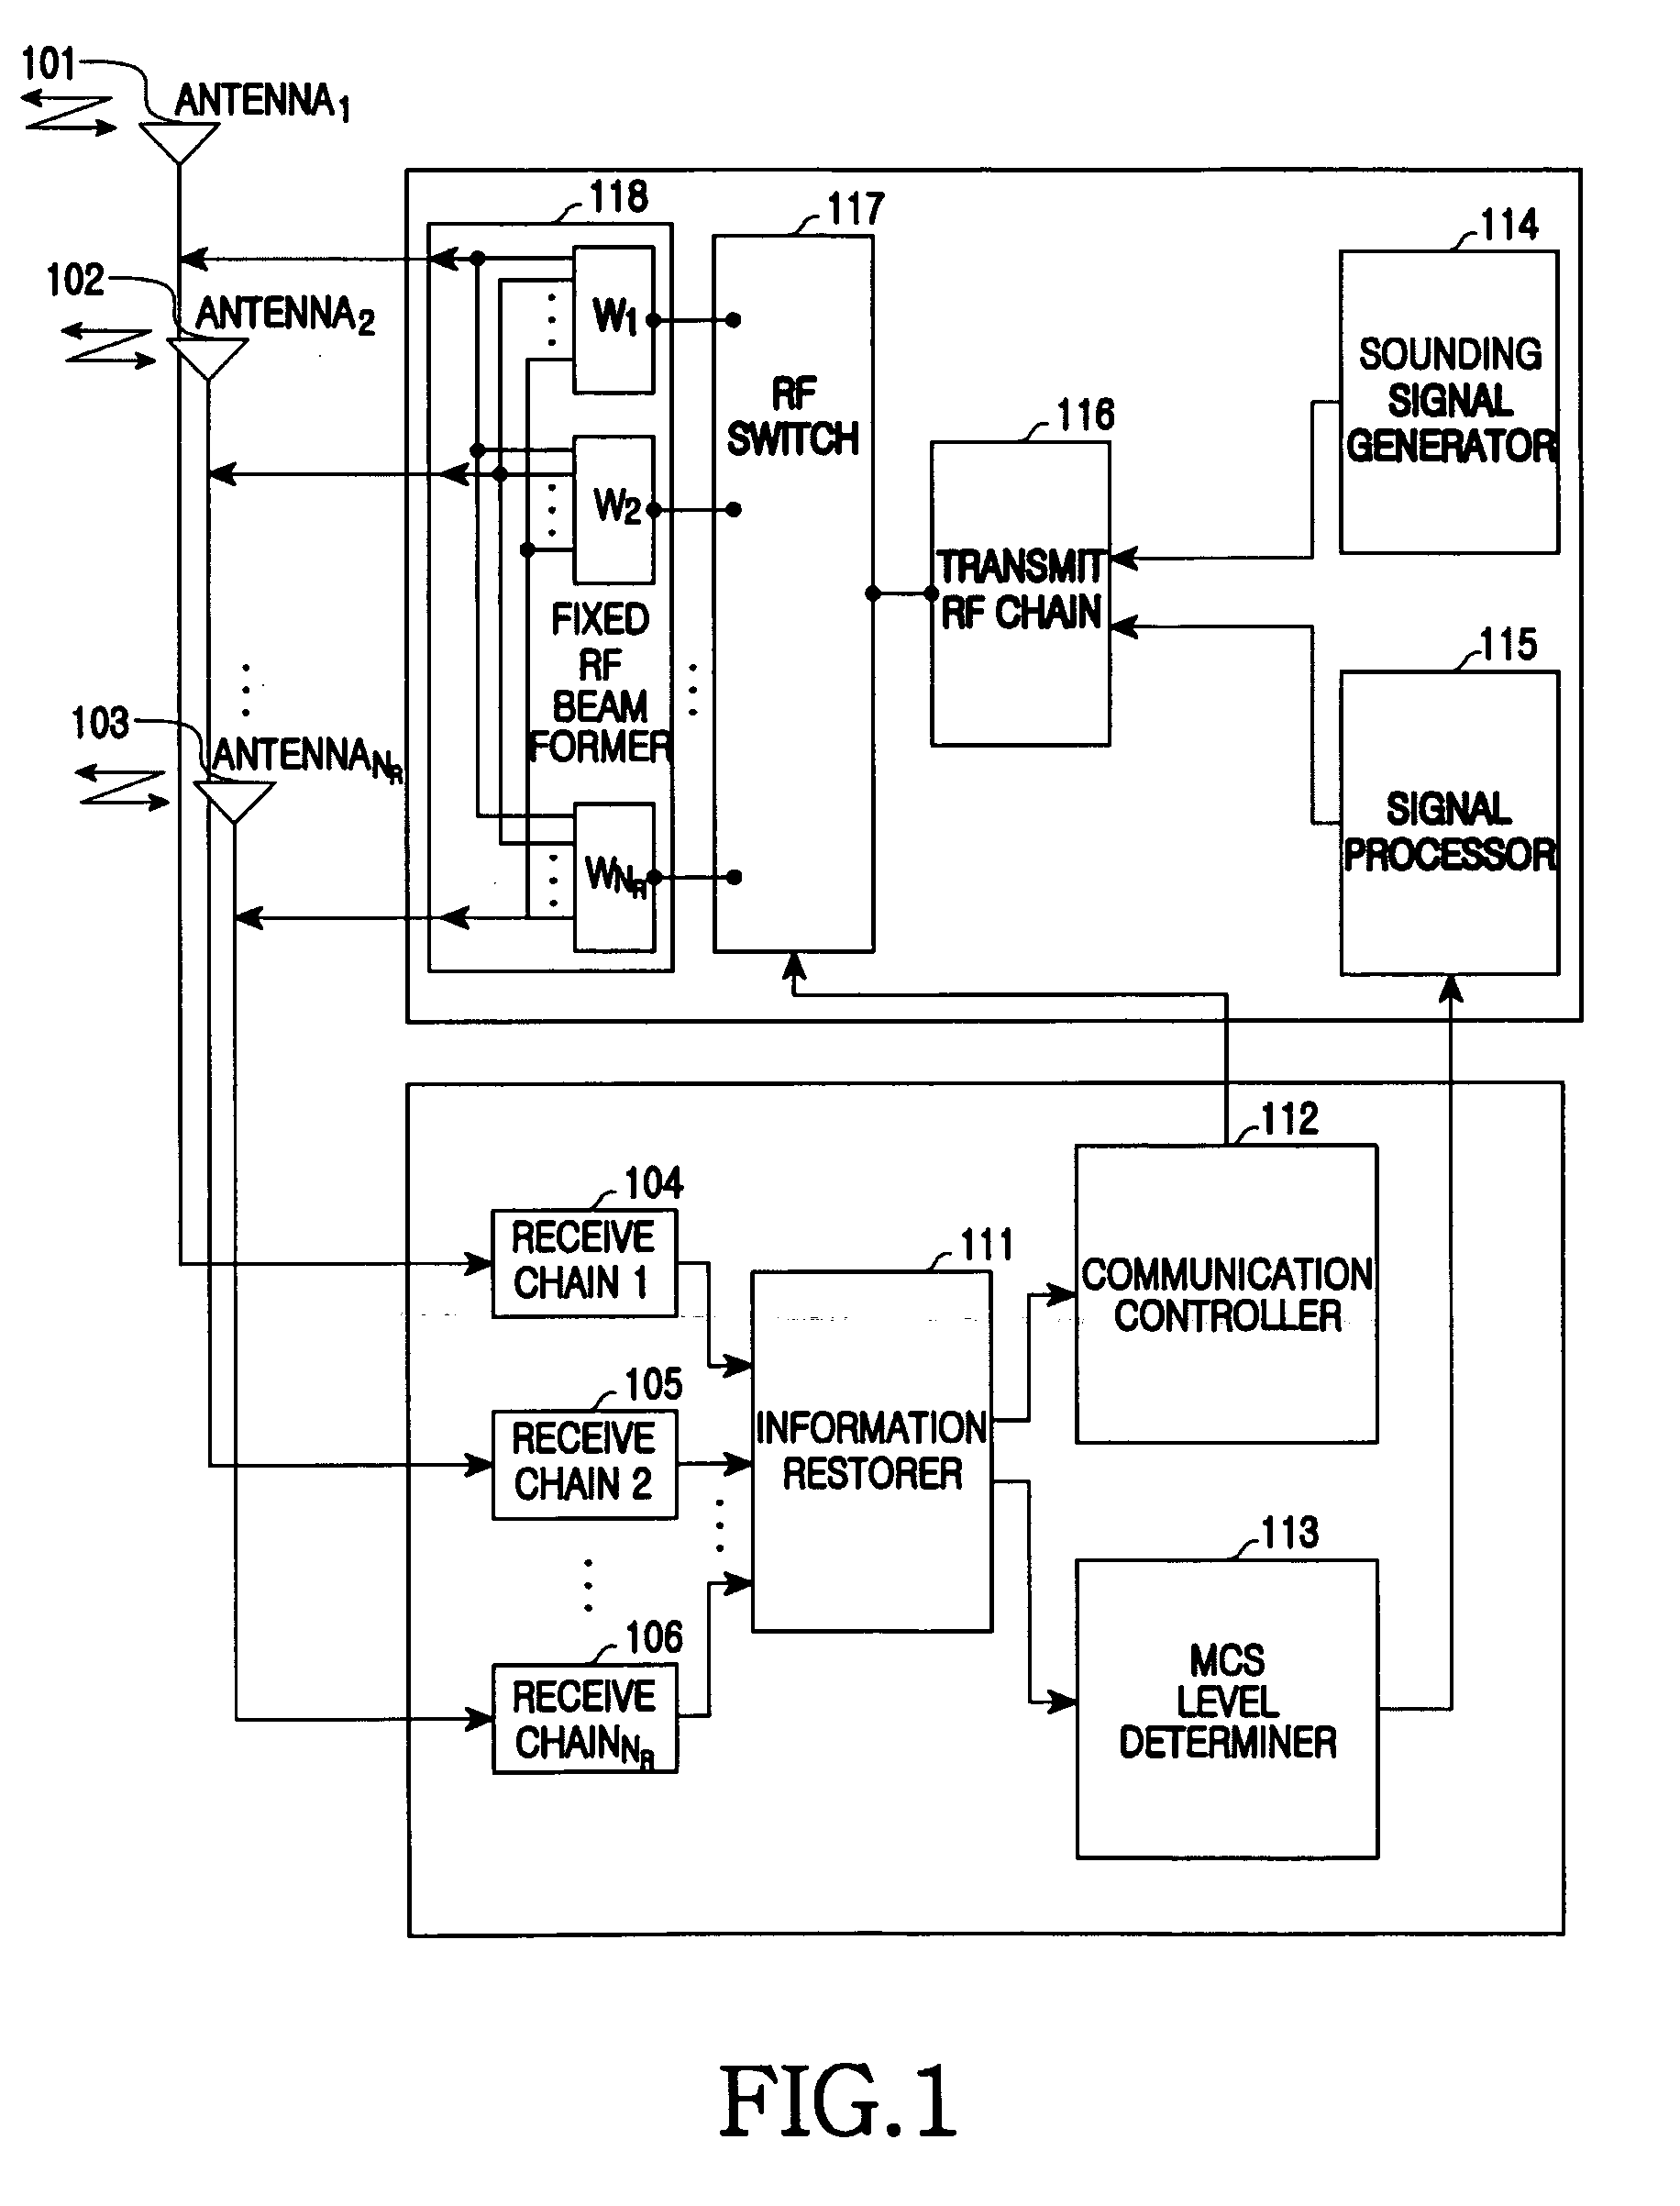 Apparatus and method for uplink beamforming and space-division multiple access (SDMA) in multiple input multiple output (MIMO) wireless communication systems